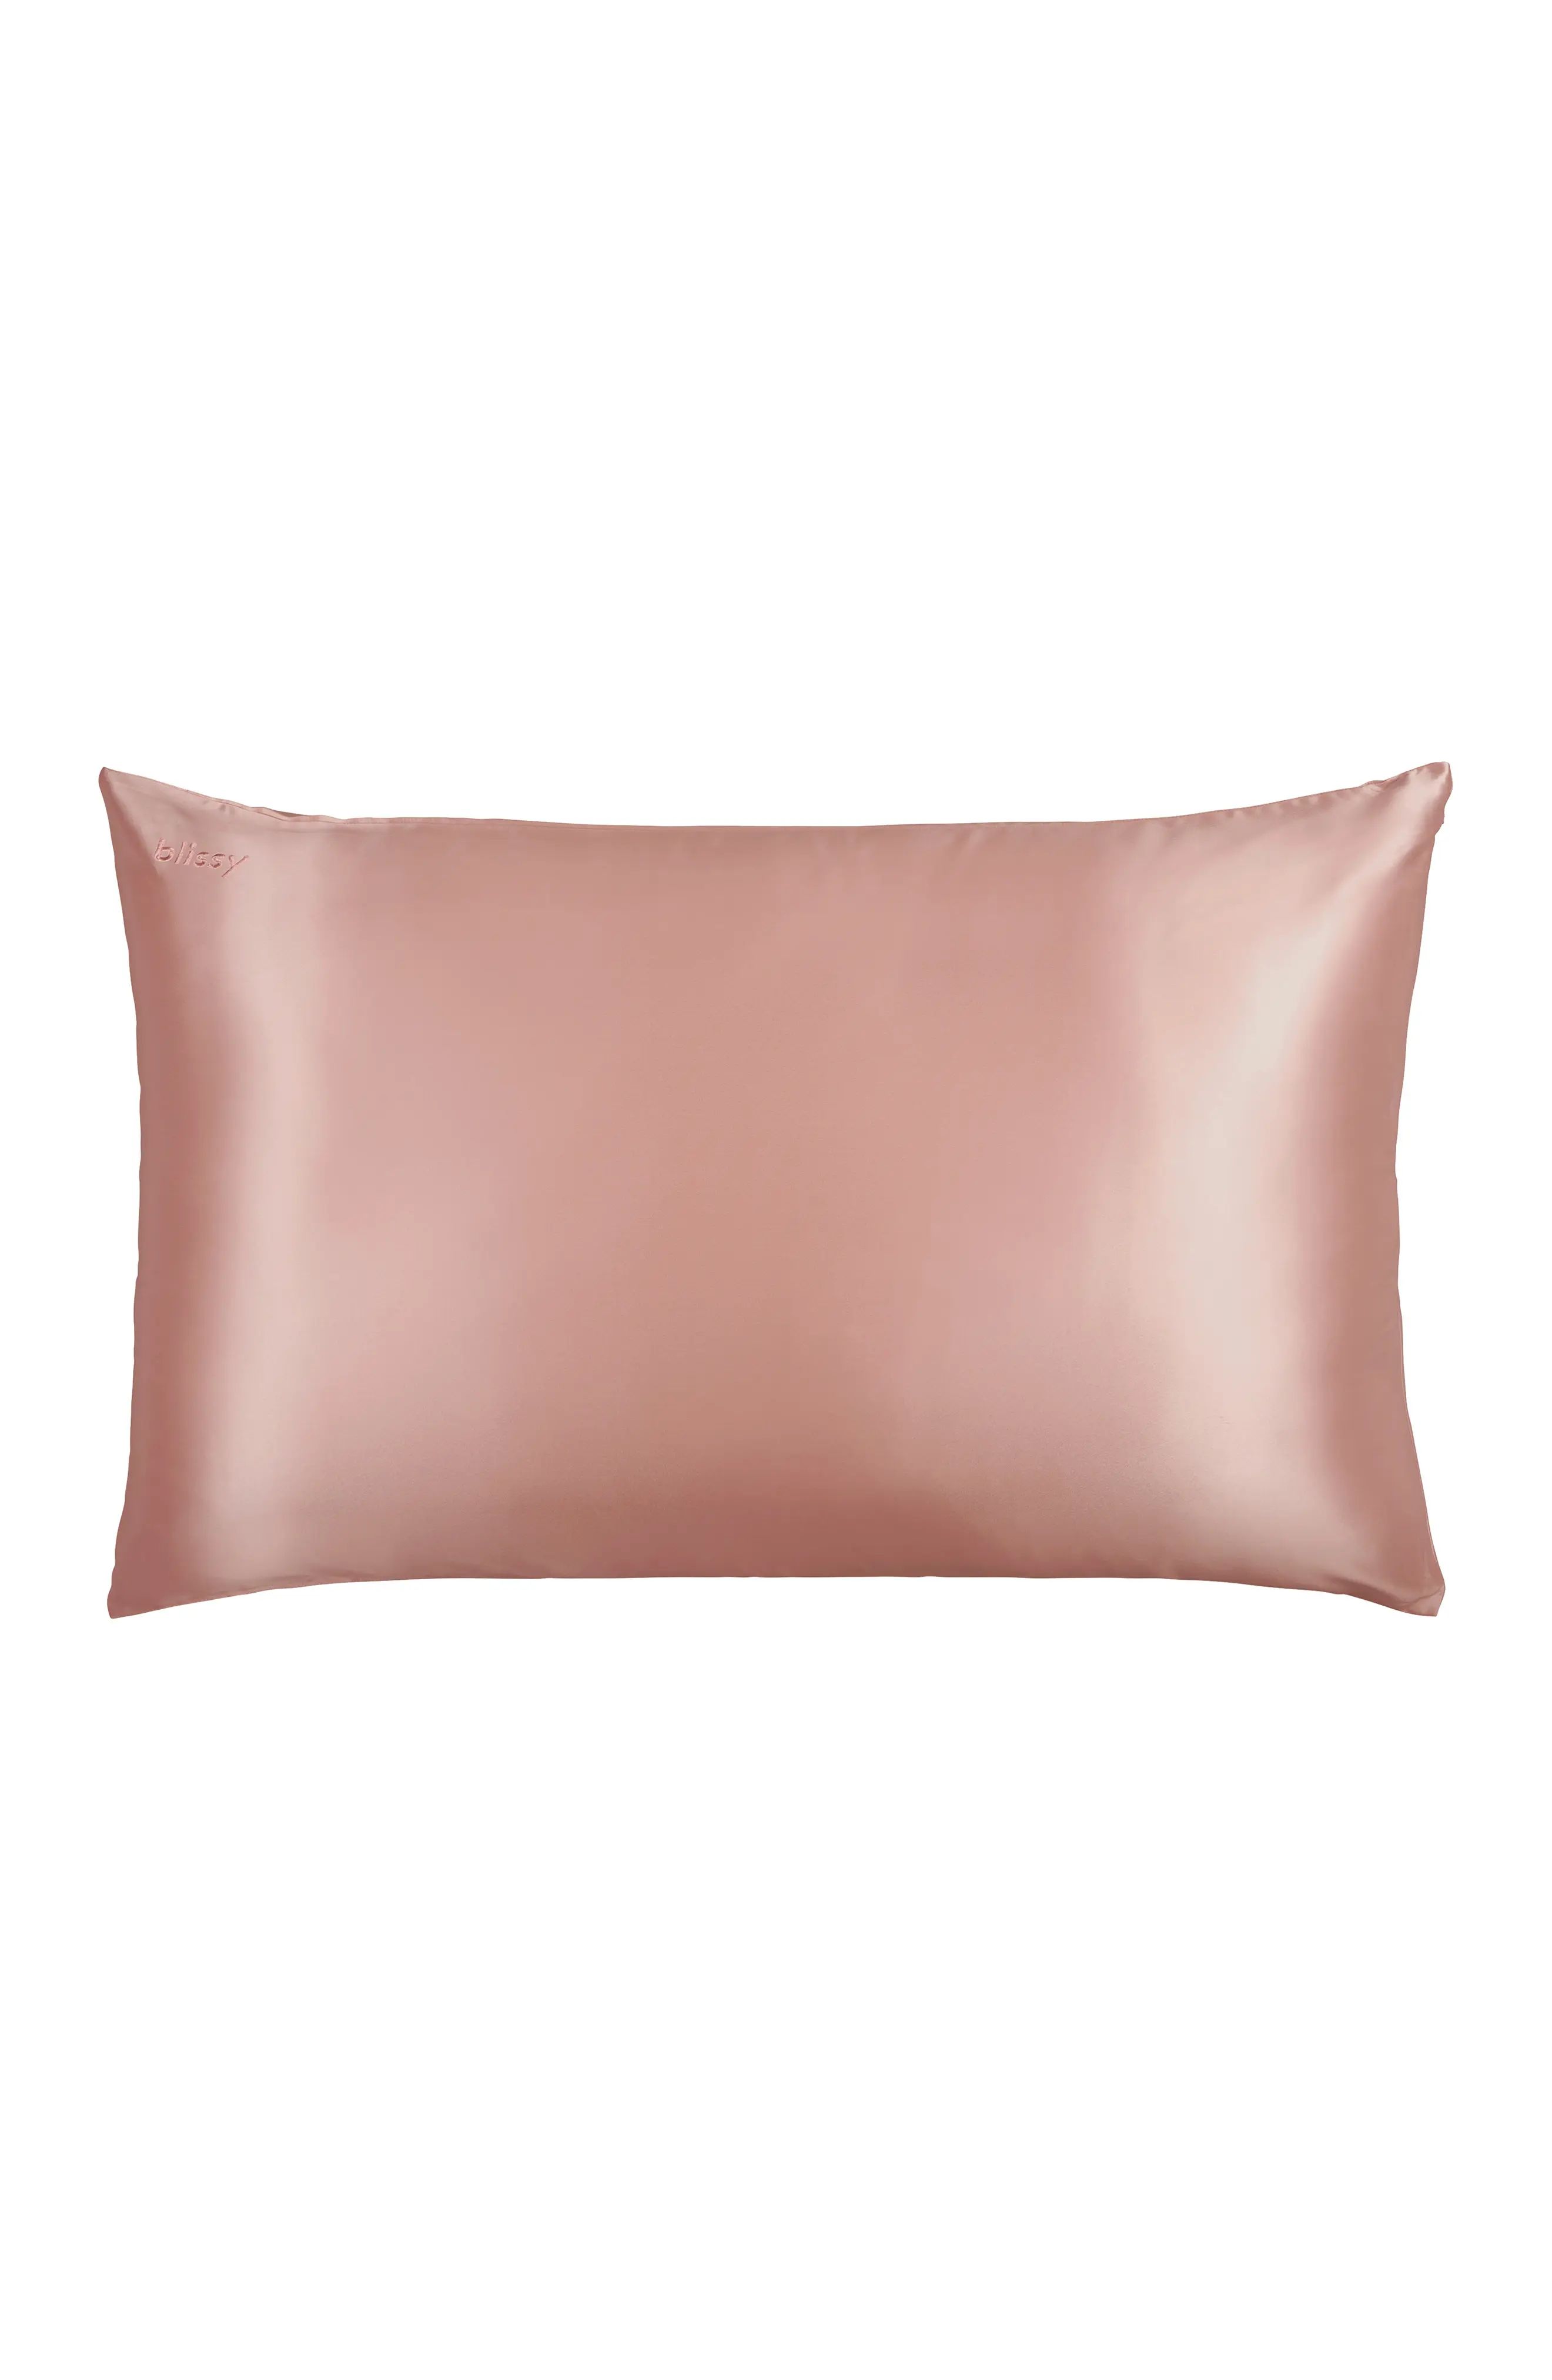 BLISSY Mulberry Silk Pillowcase in Rose Gold at Nordstrom, Size Queen | Nordstrom